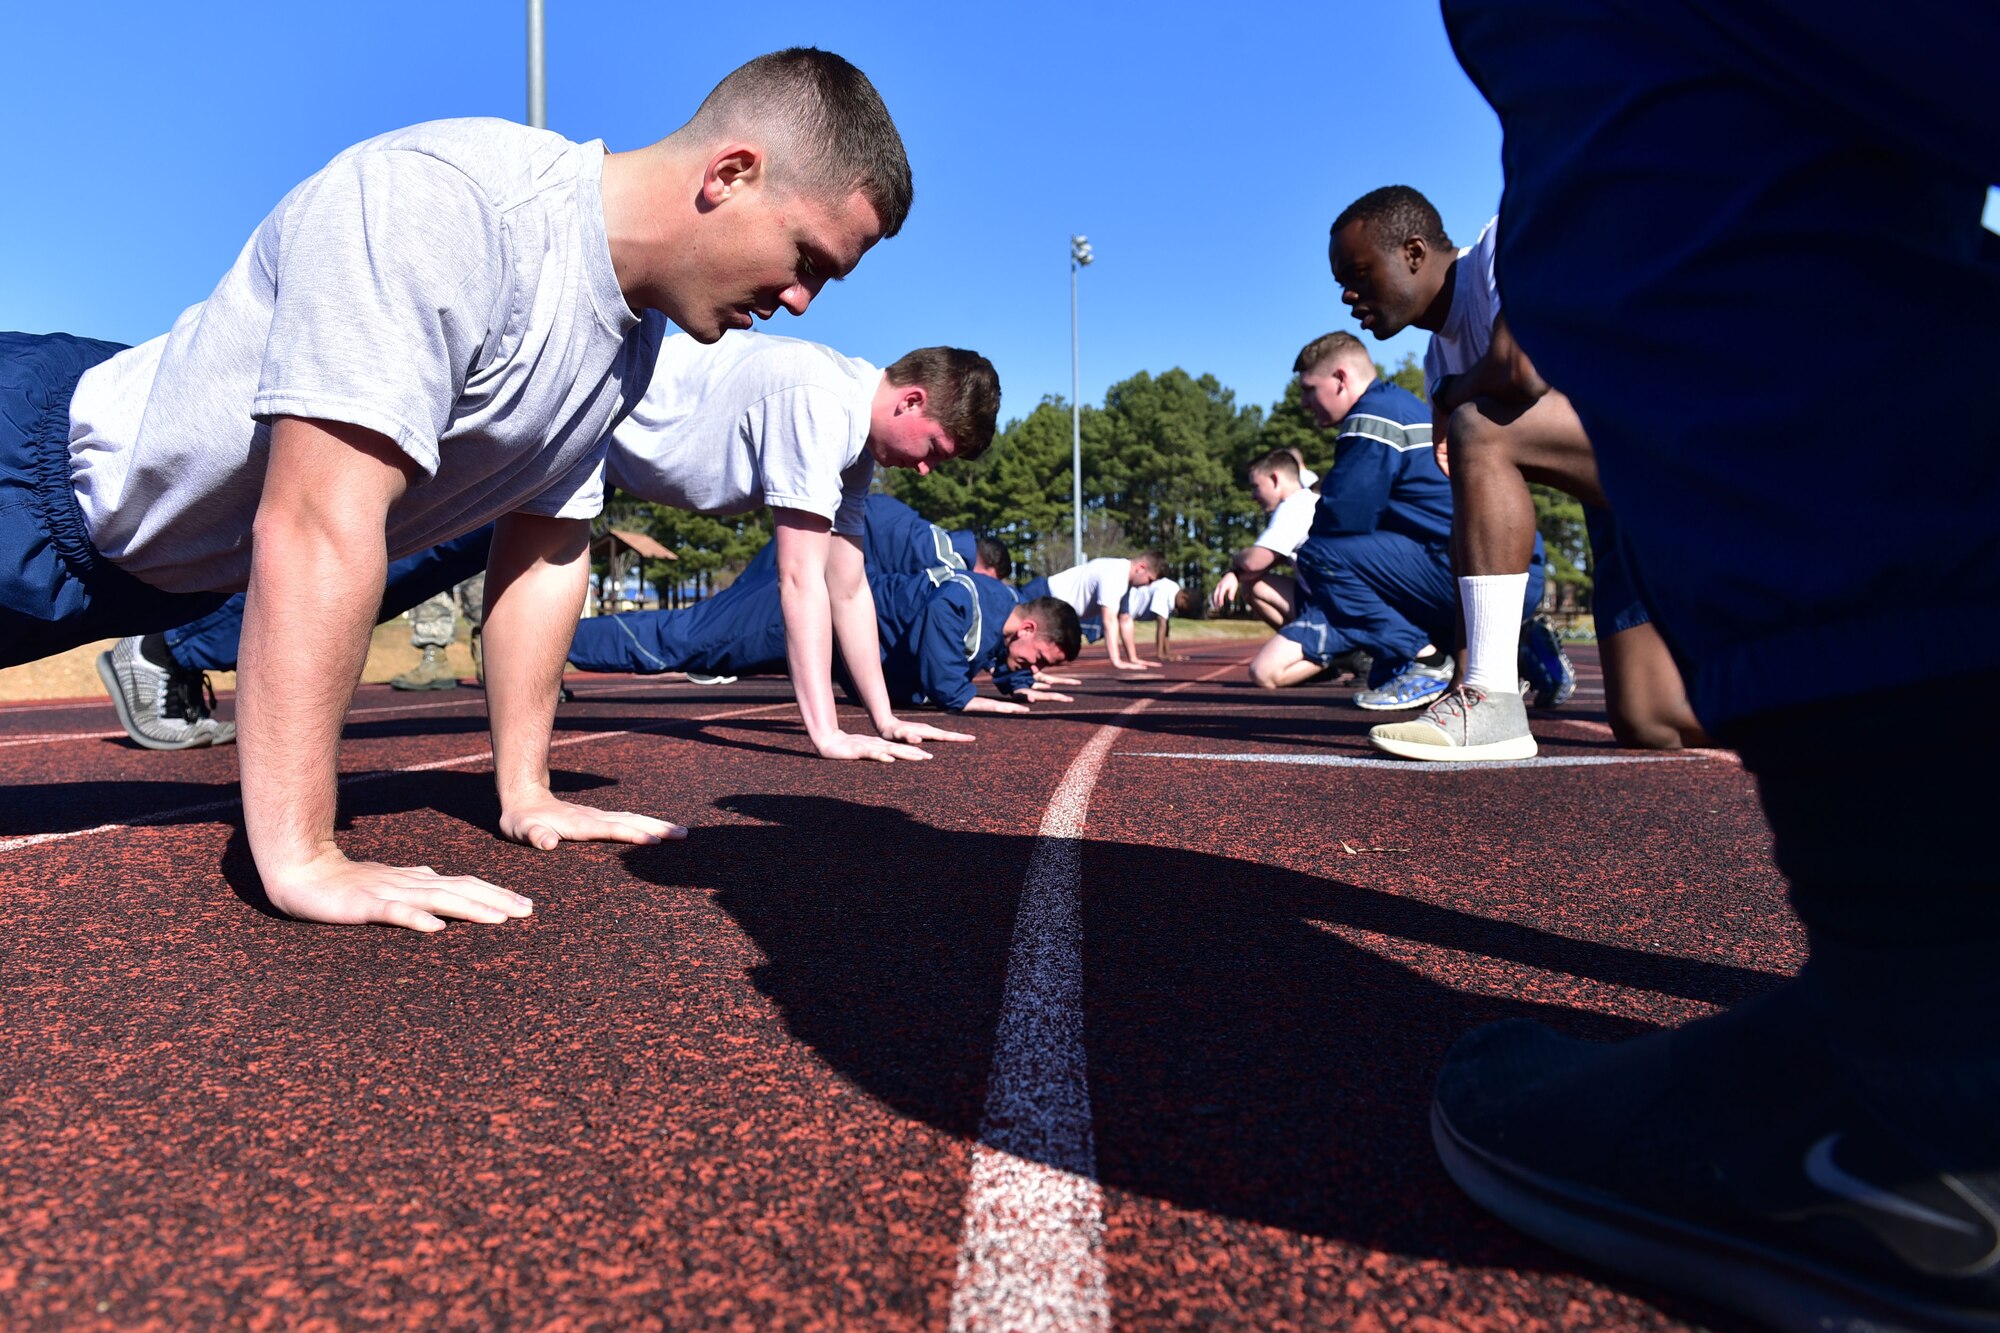 Airmen do push-ups, while other Airmen kneel in front of them.